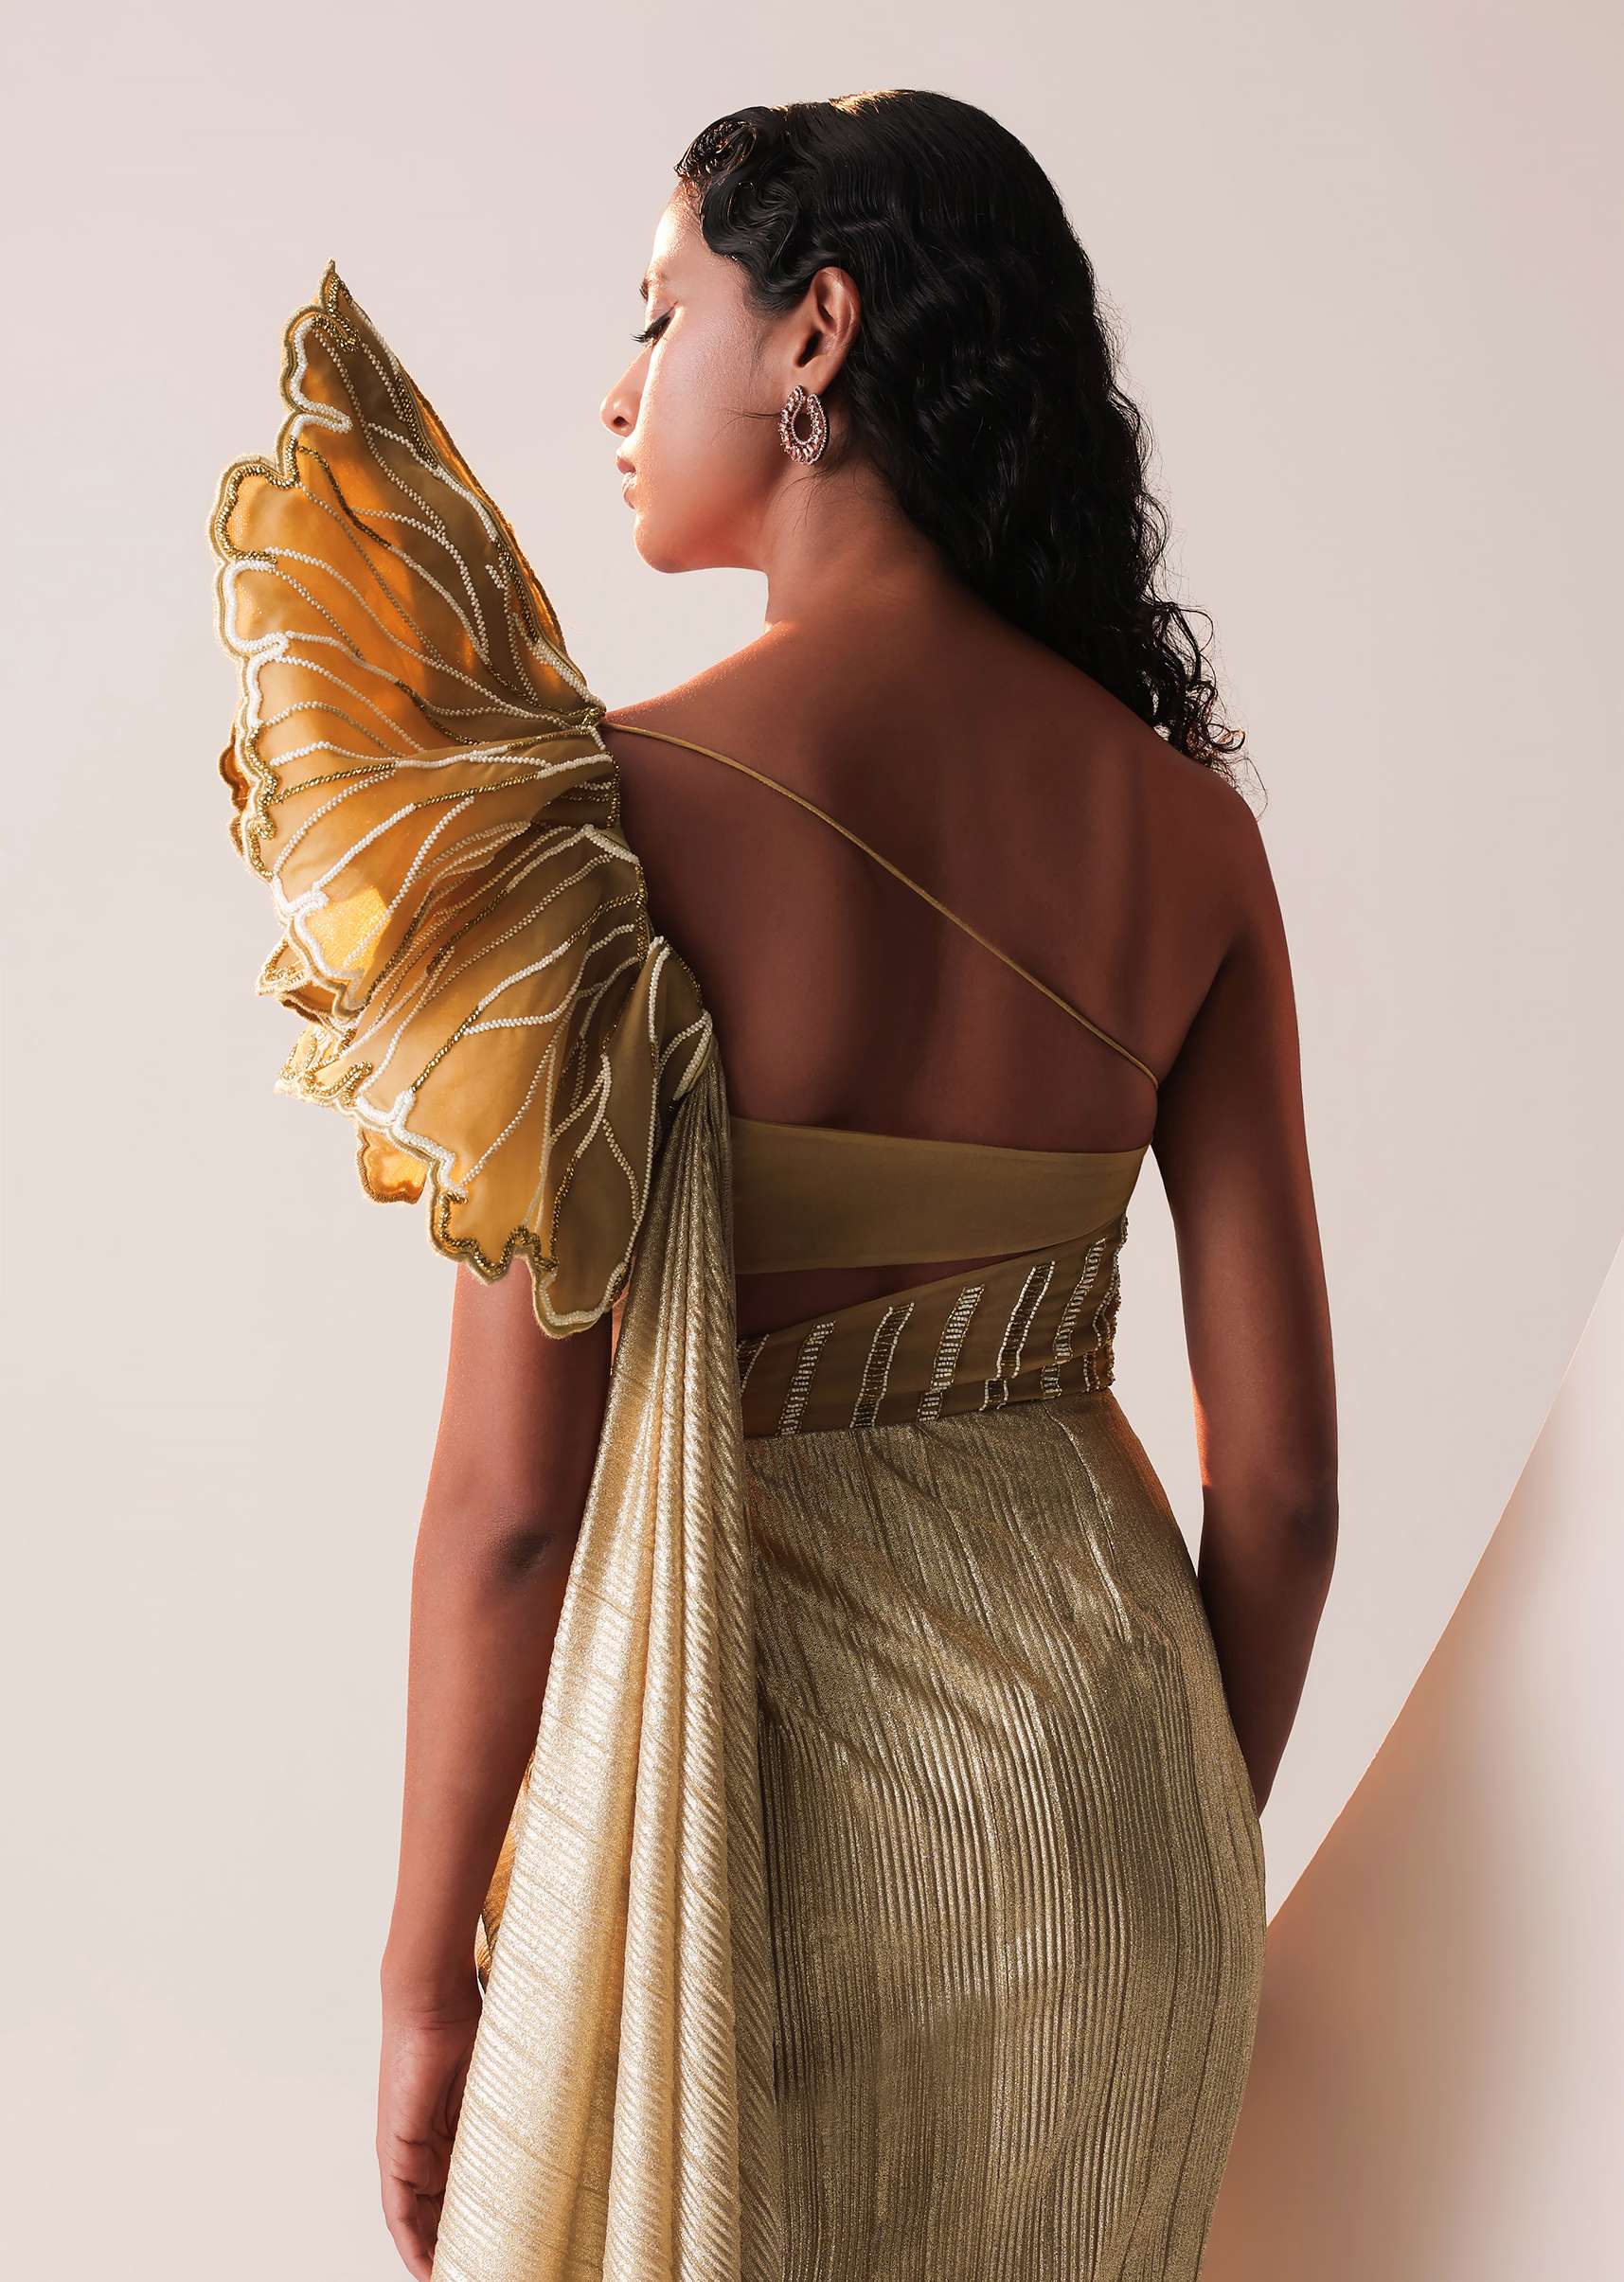 Glam Gold Gown In Knit Strechable Fabric With Embroidery